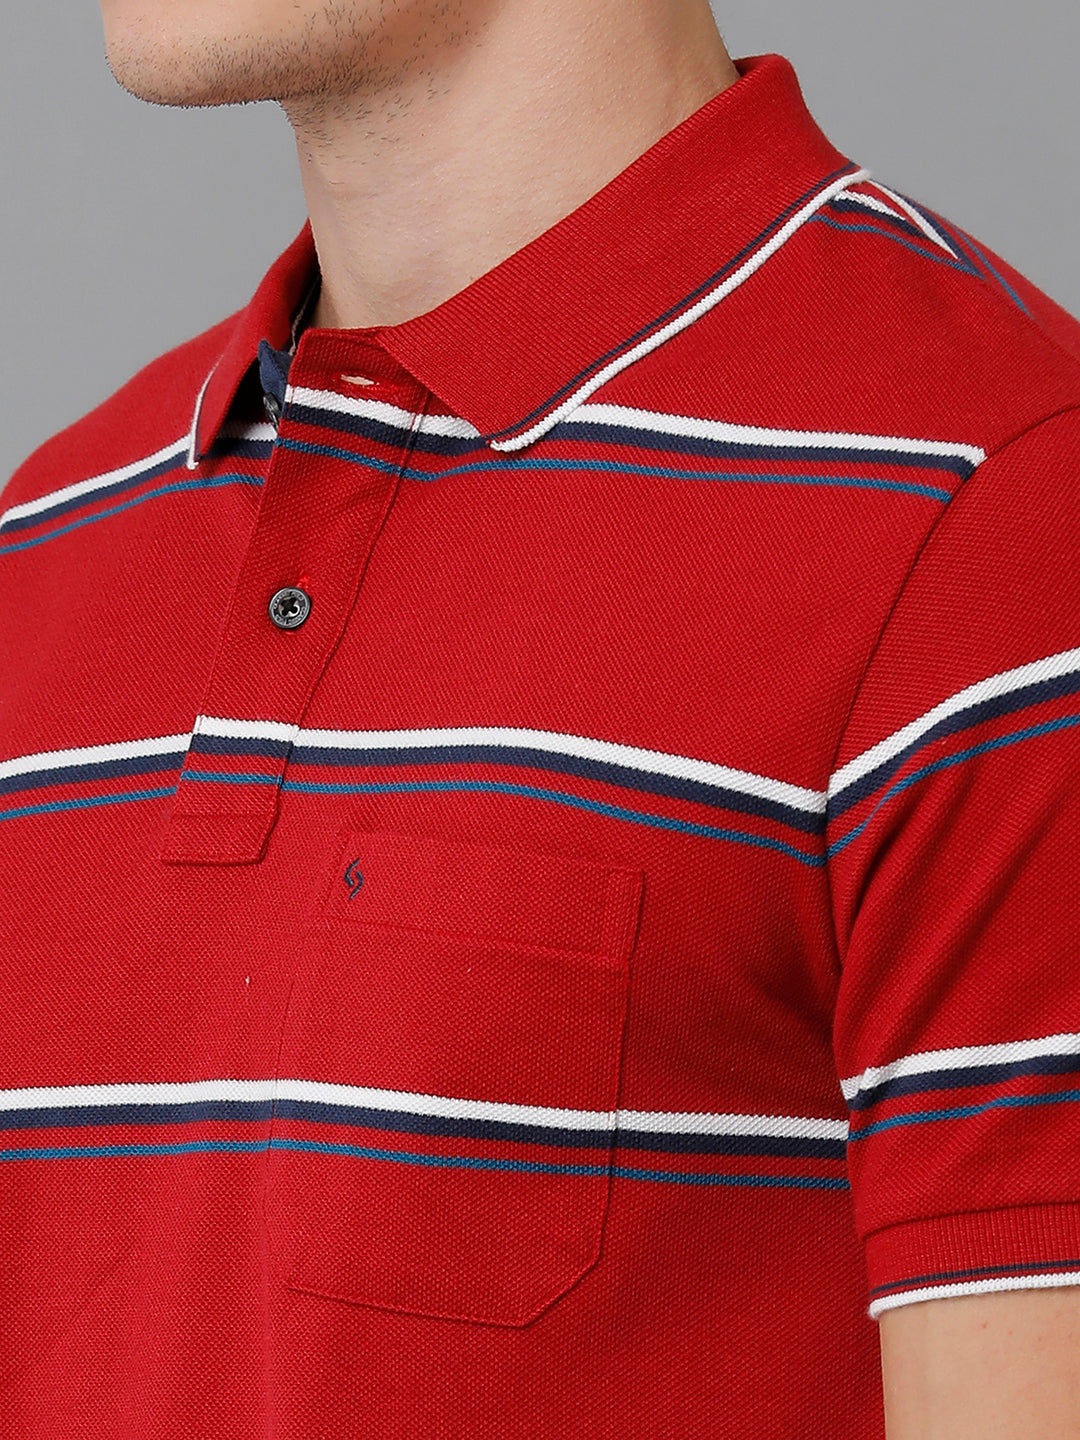 Classic Polo Men's Cotton Blend Striped Half Sleeve Slim Fit Polo Neck Red Color T-Shirt | Adore - 191 B